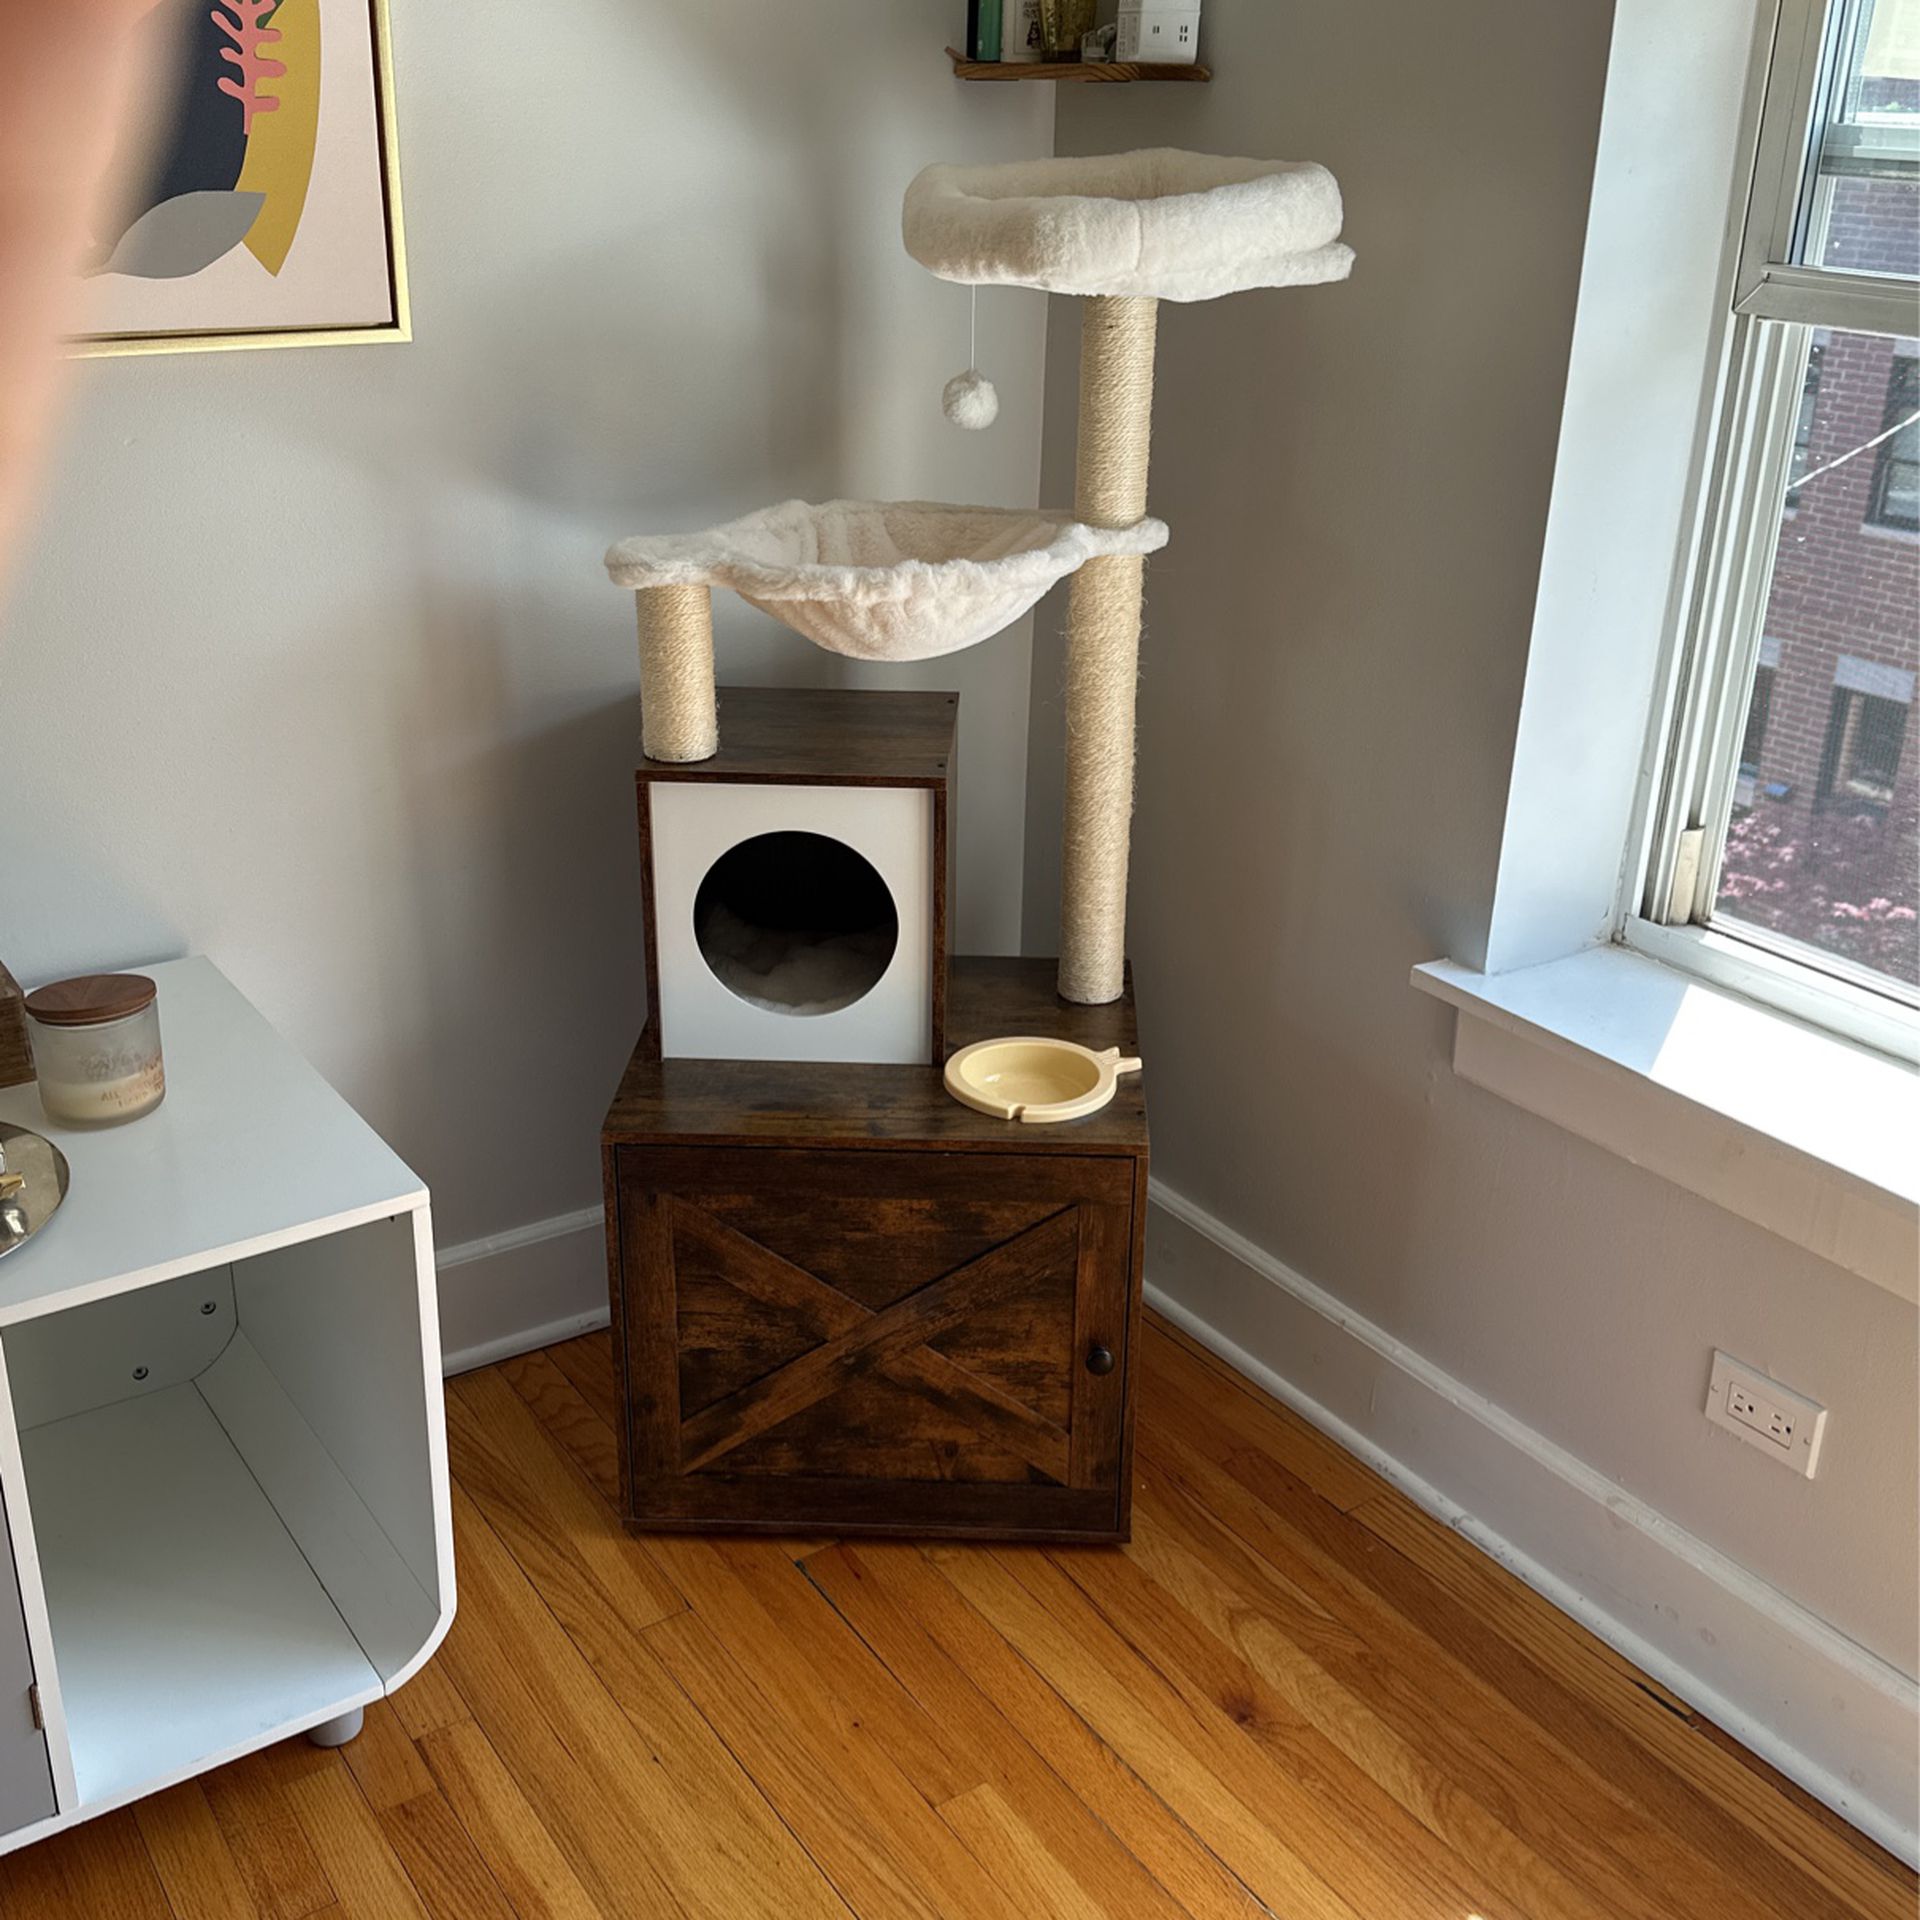 Like New Cat Tree With Hidden Litter Box Compartment - If Still Up, It’s Still Available!